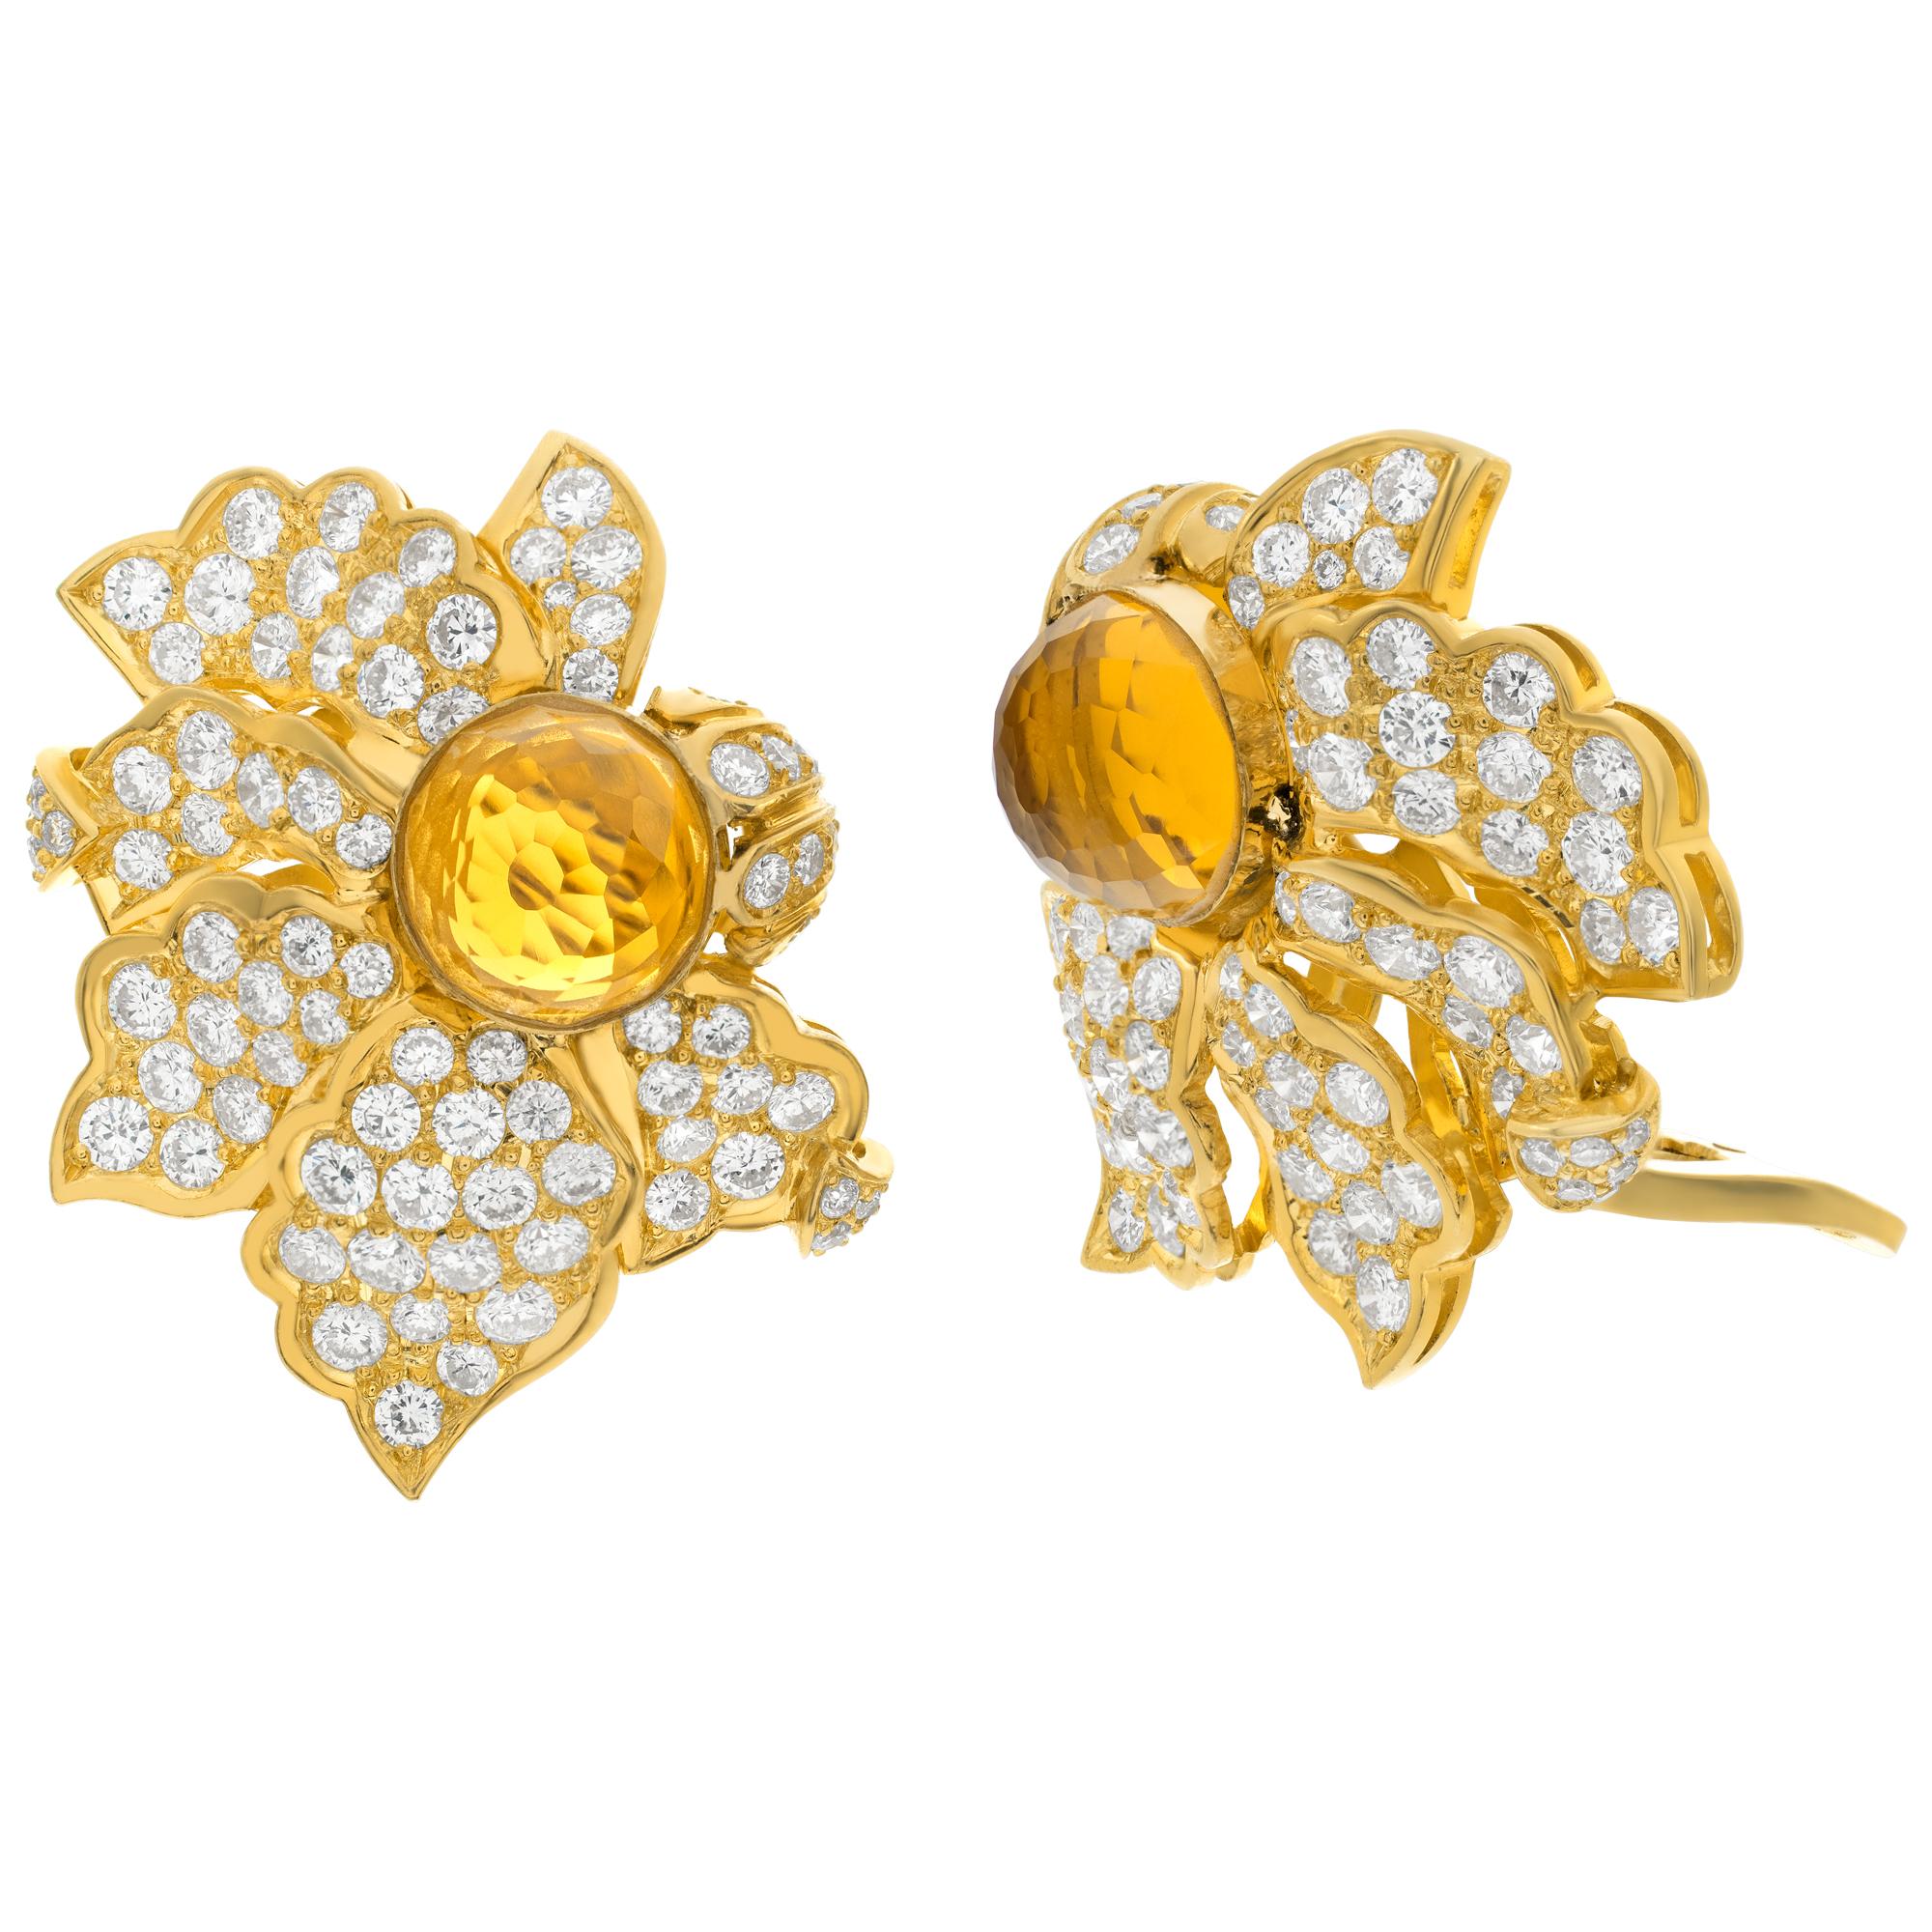 Diamonds flower earrings with brazilian orange Citrine center in 18K yellow gold. Round brilliant cut diamonds total approx. weight over 5.00 carats, estimate G-H color, VVS-VS clarity. Center round orange citrine approx. over 2.50 carats each.